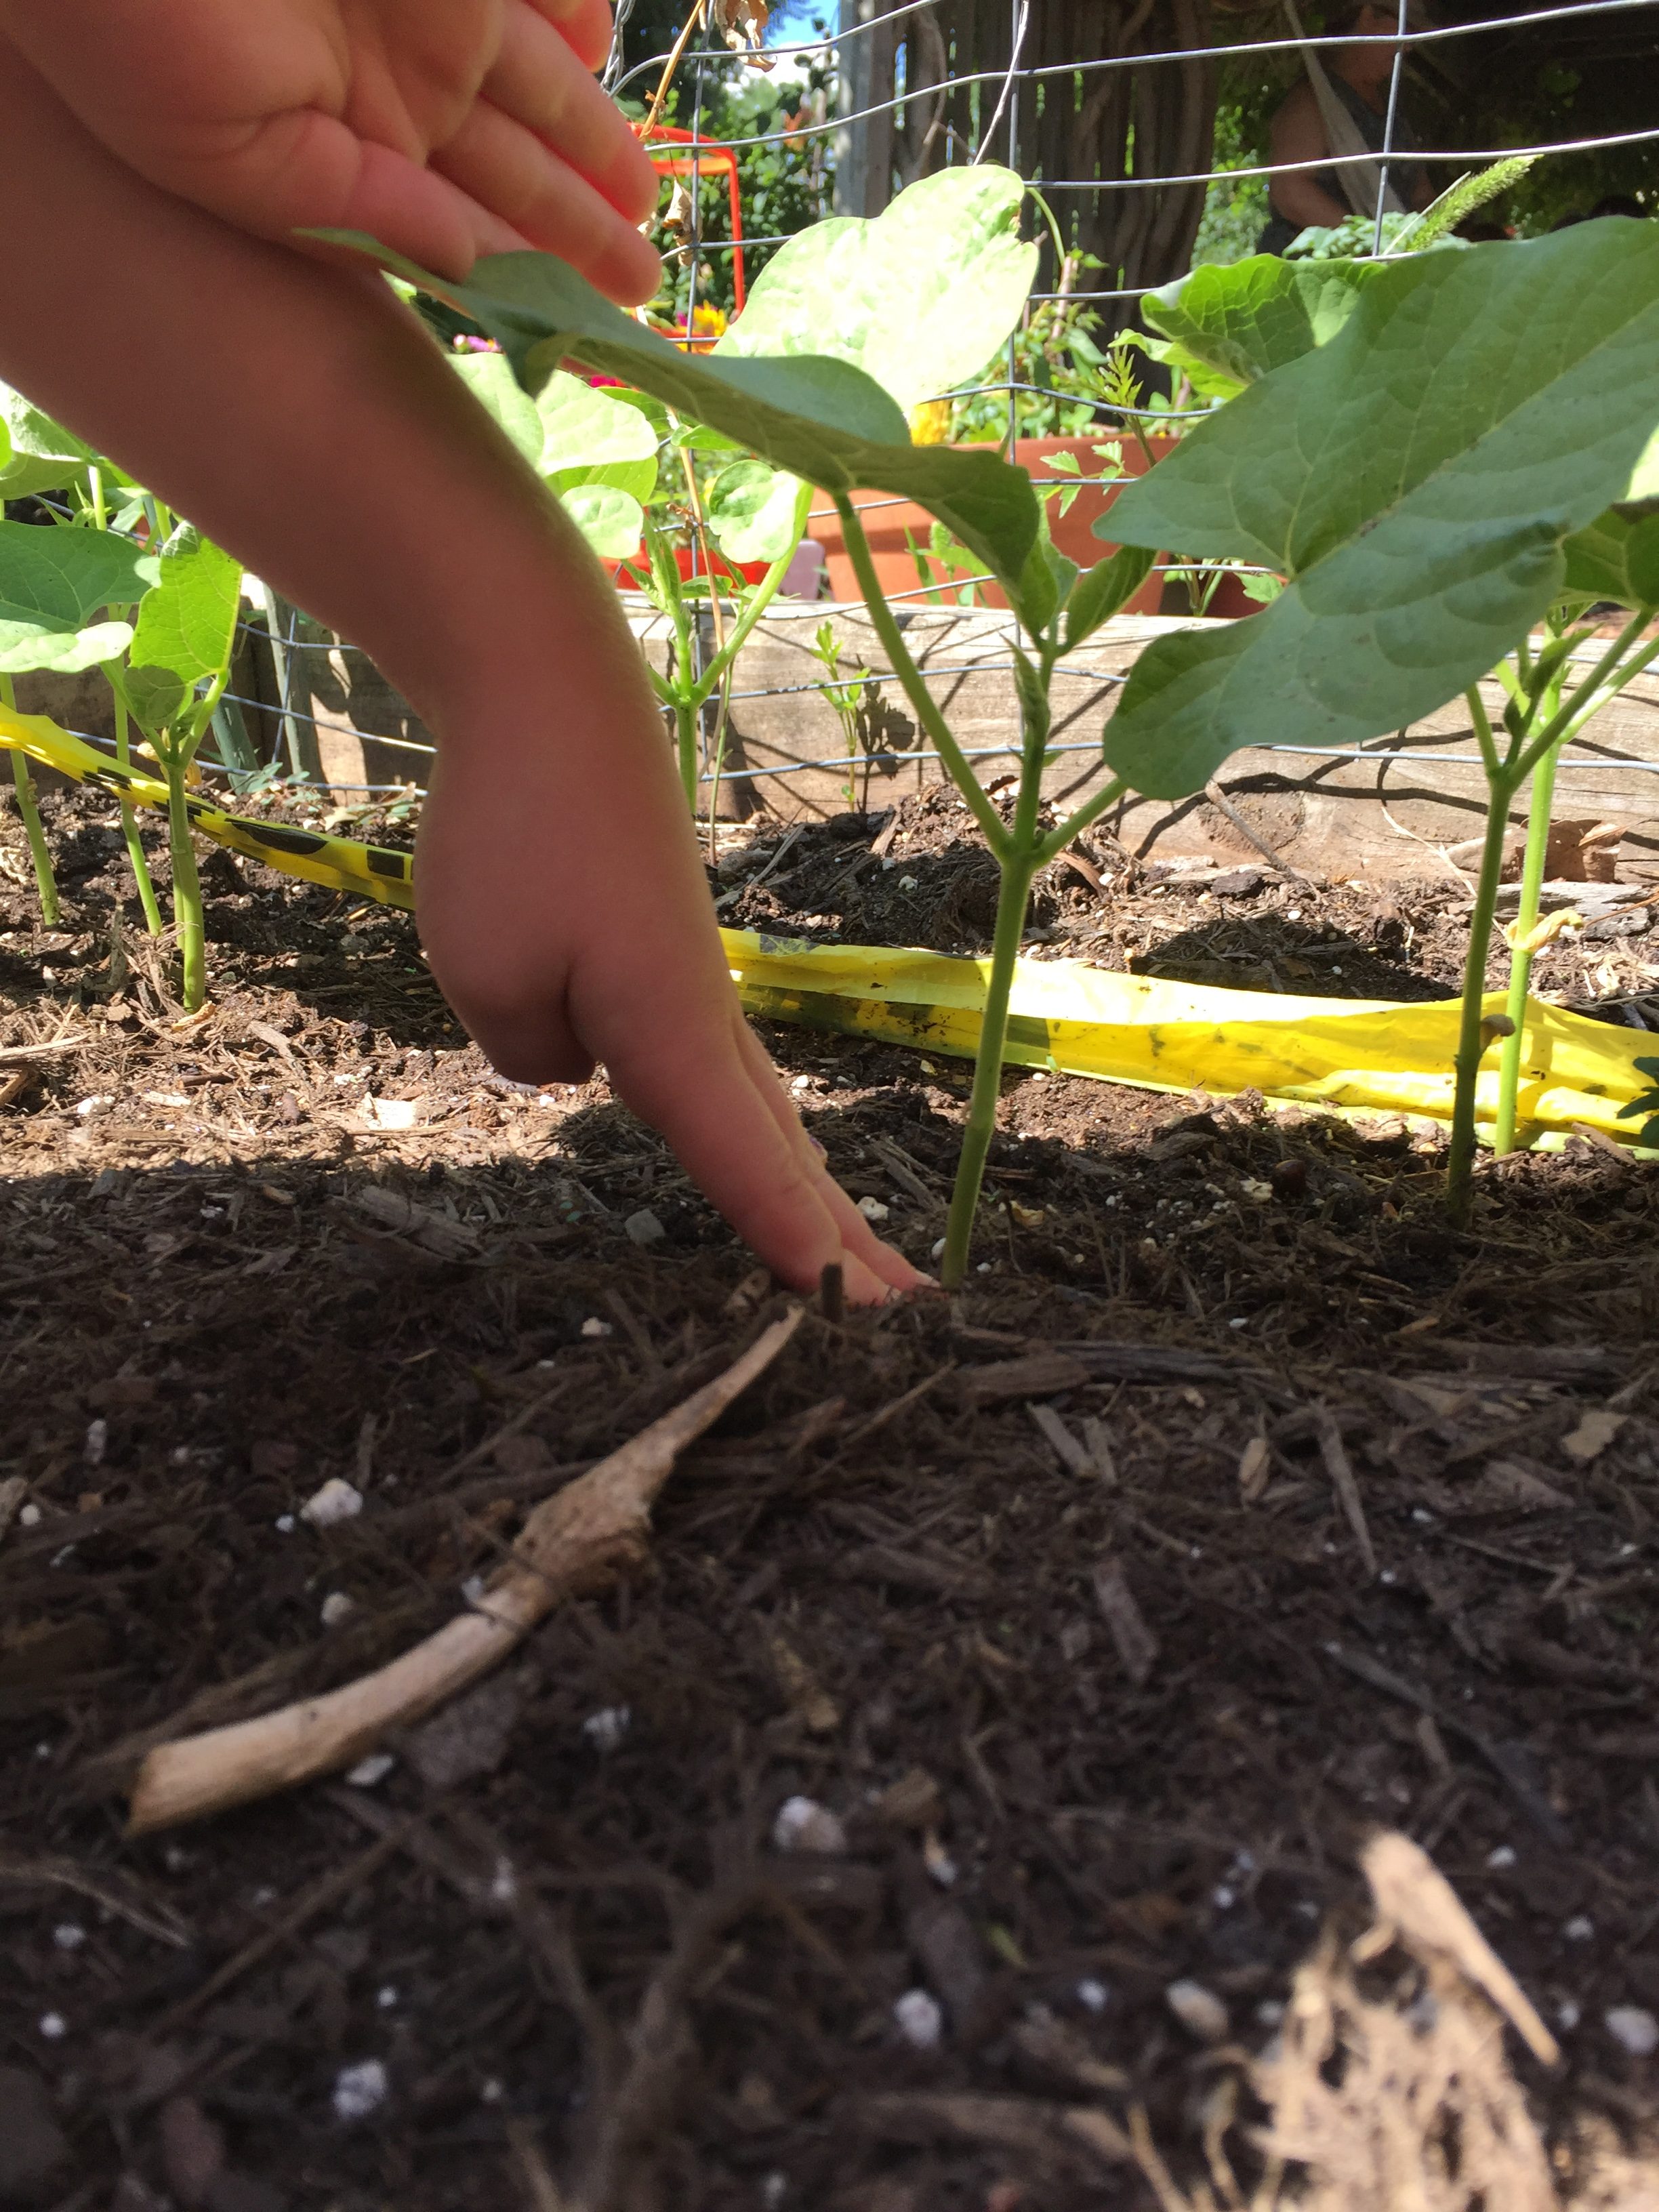 Child compares length of hand to the height of a garden-grown bean plant.